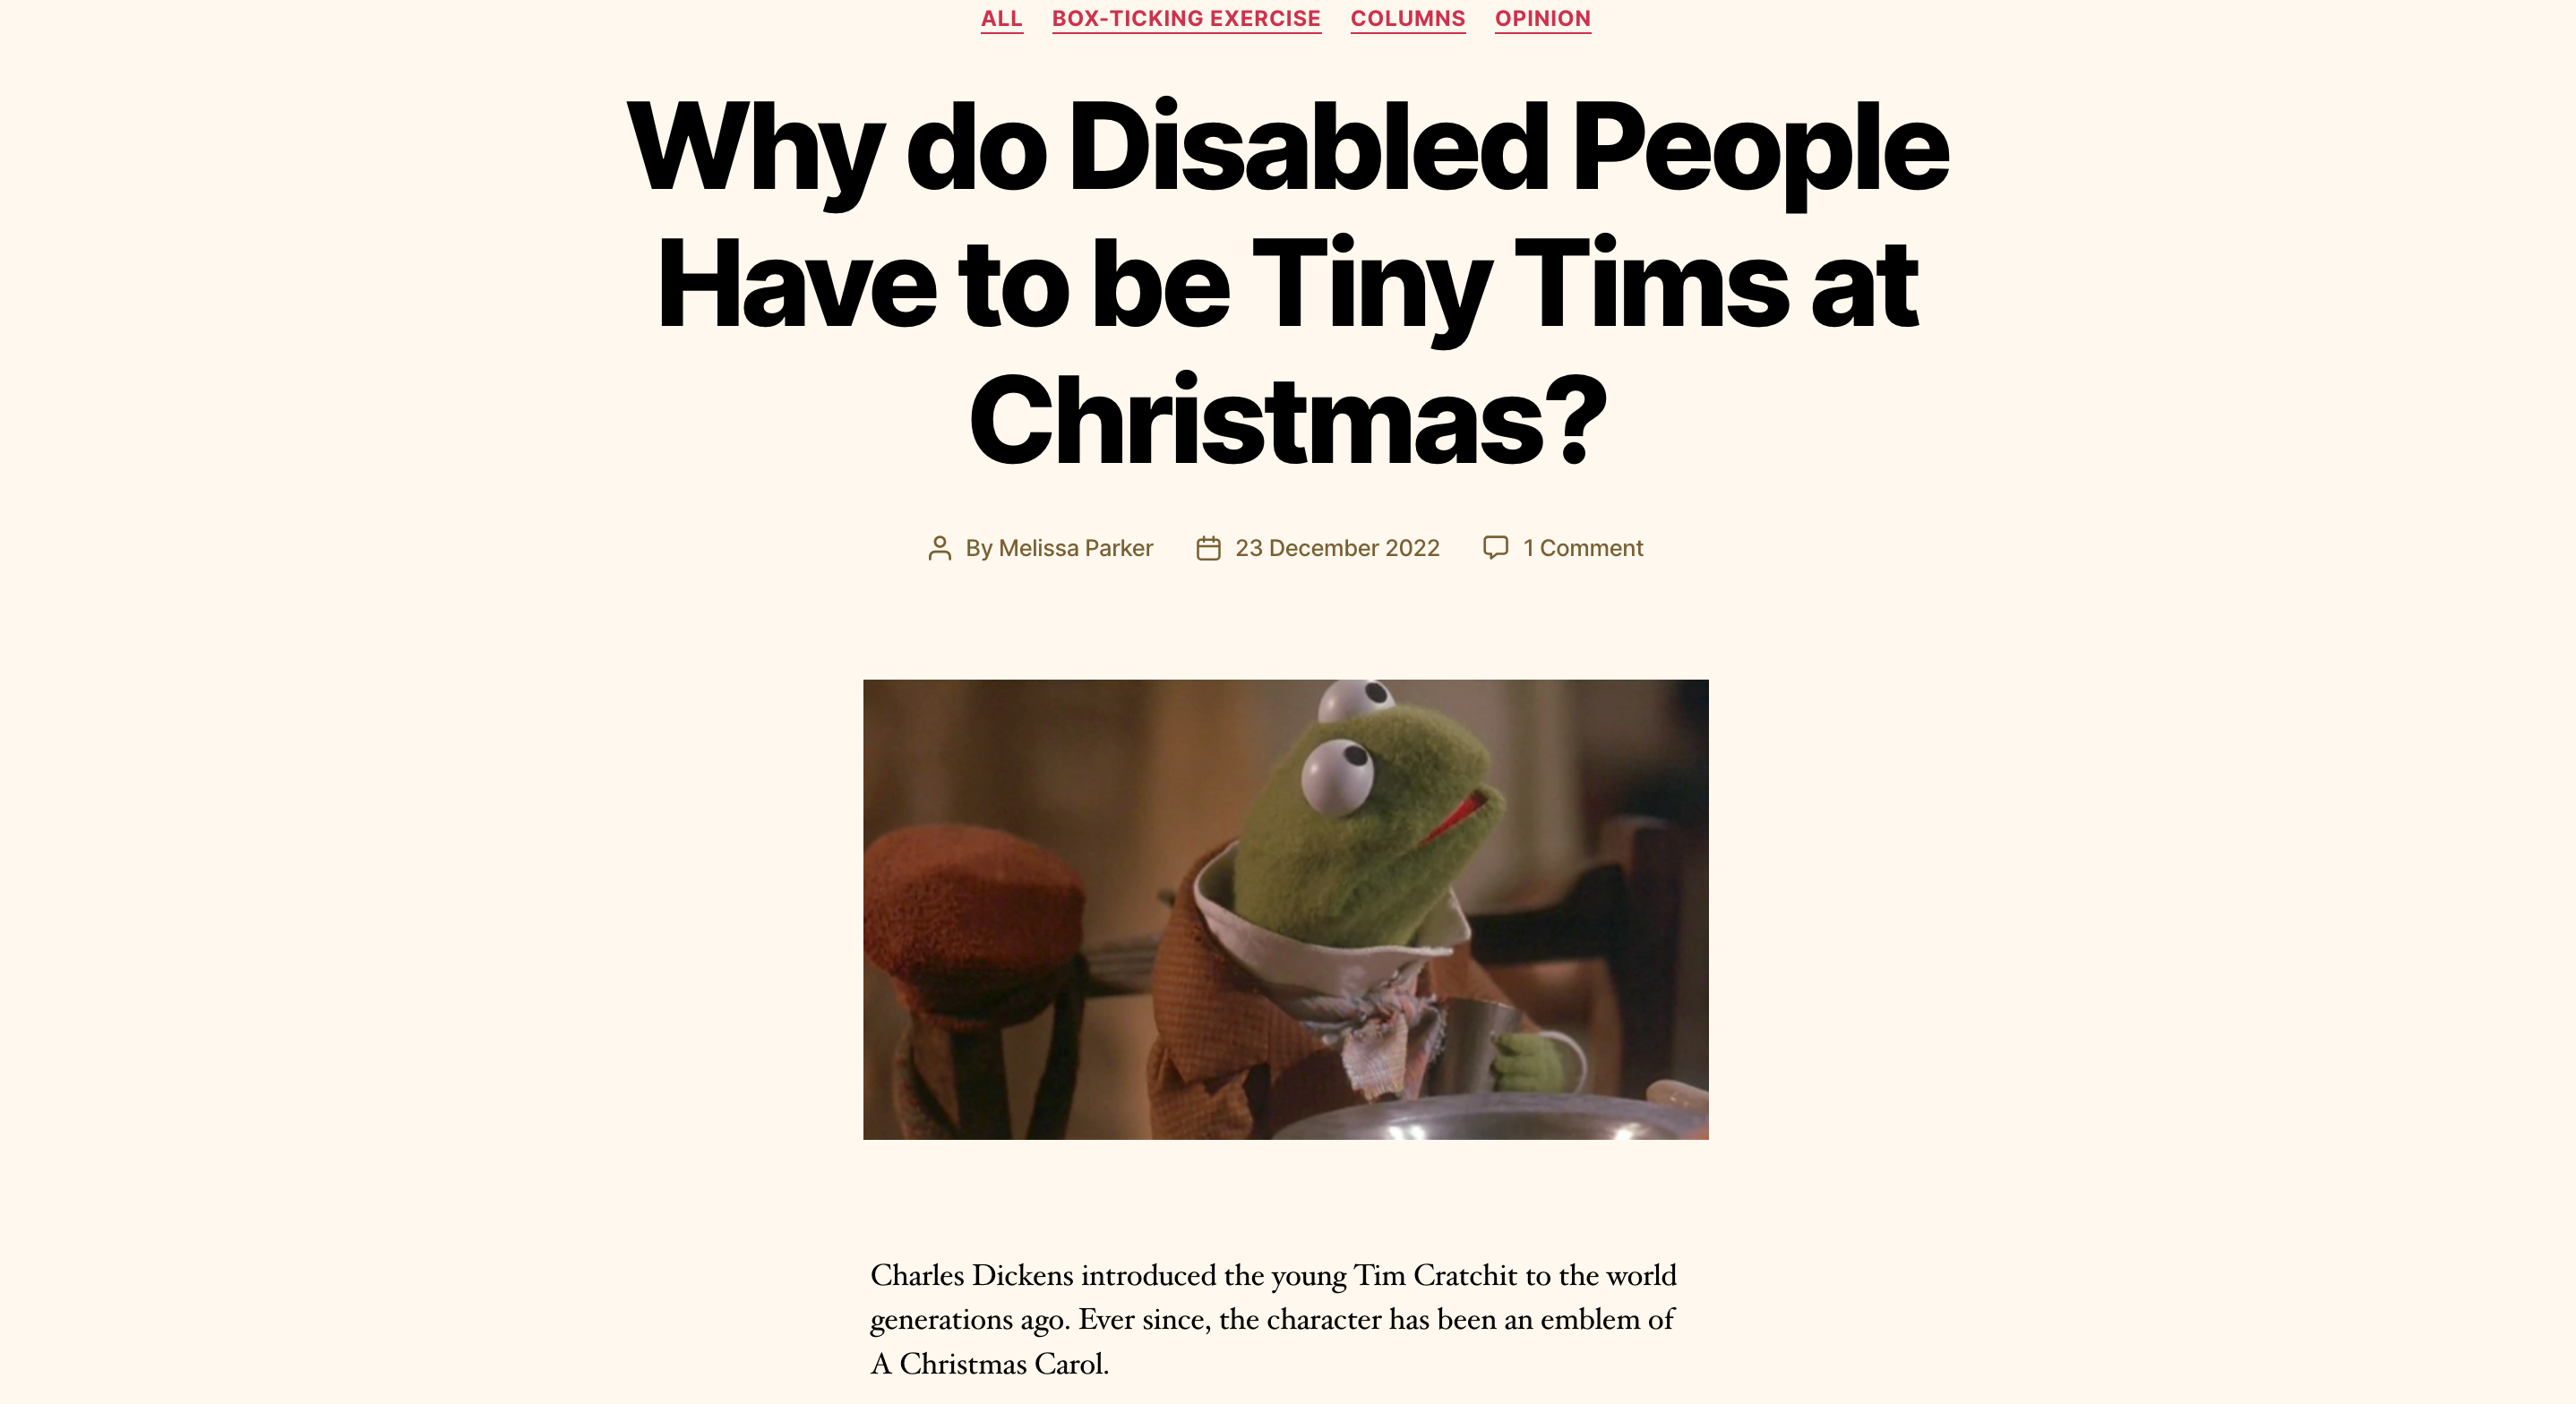 Headline: Why do Disabled People Have to be Tiny Tims at Christmas? Intro: Charles Dickens introduced the young Tim Cratchit to the world generations ago. Ever since, the character has been an emblem of A Christmas Carol.